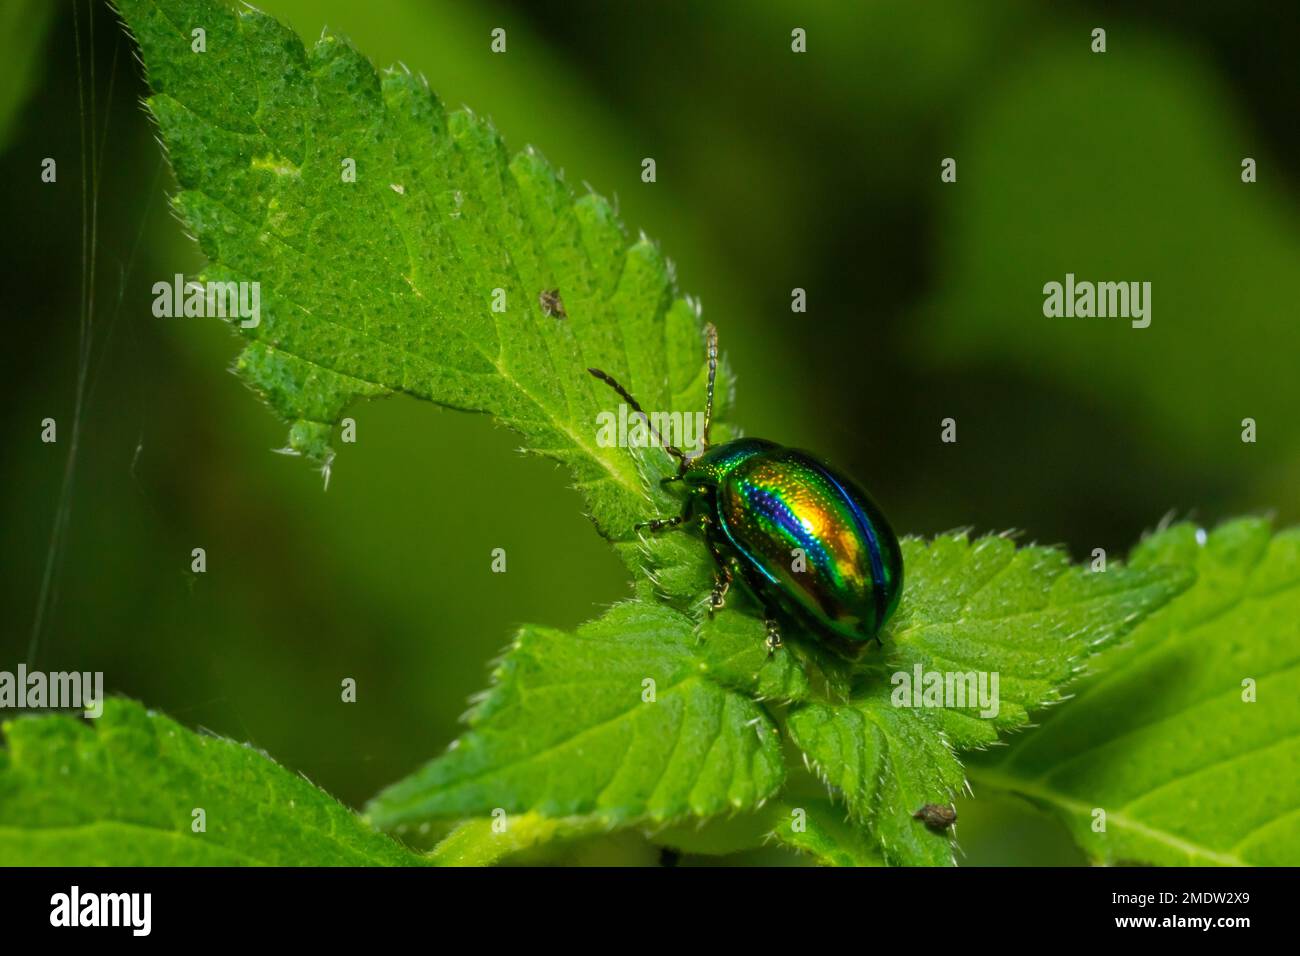 The beetle Chrysolina fastuosa close up pictures on the green leaves. Stock Photo